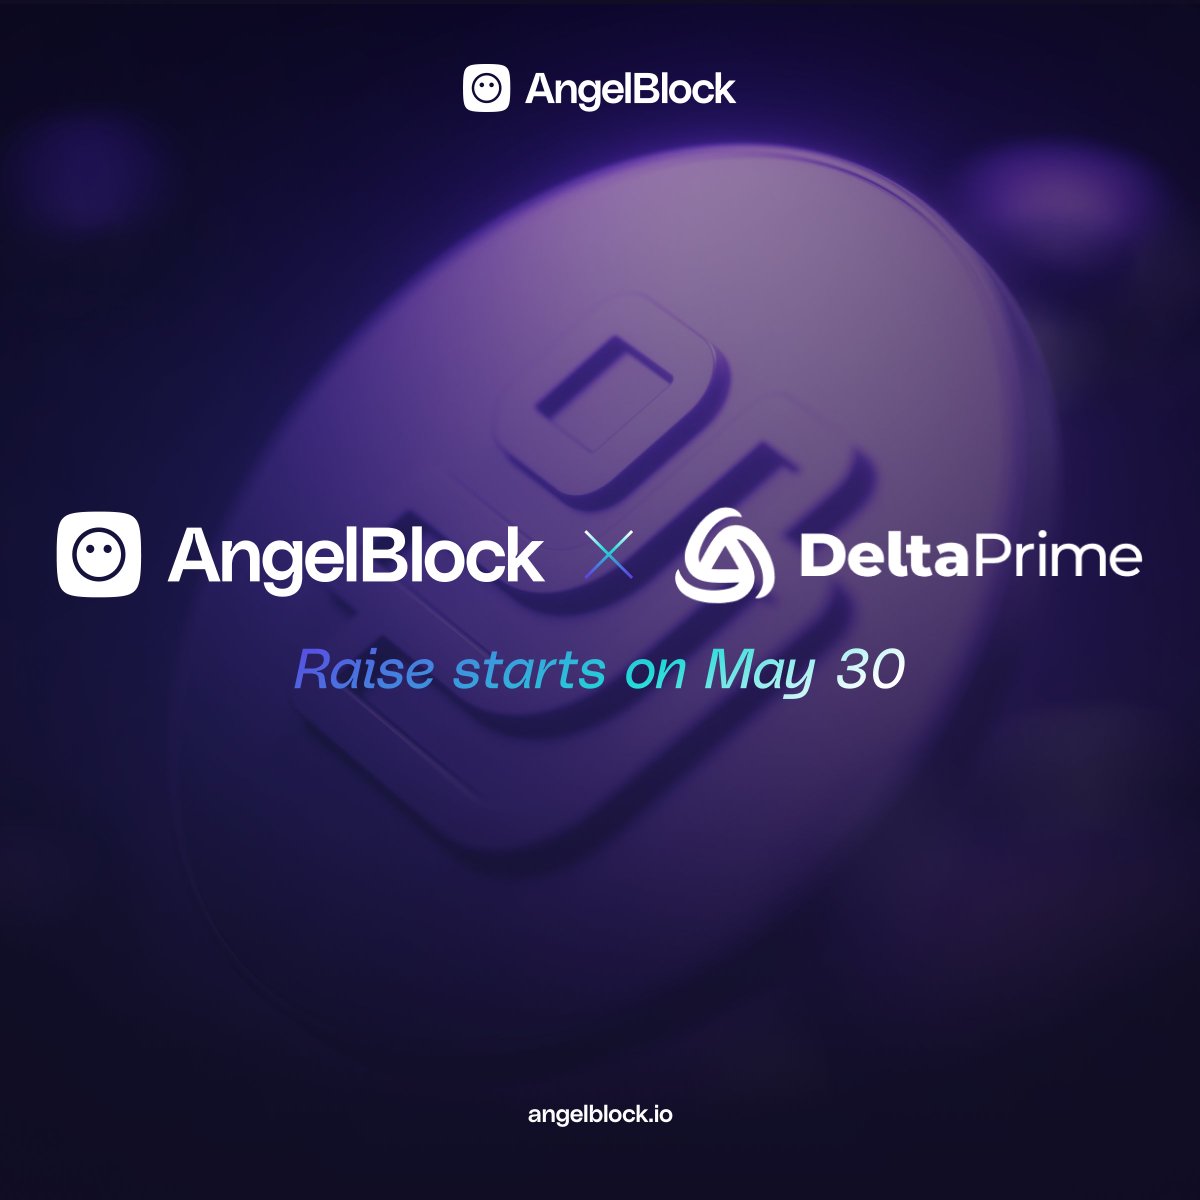 Great news! @DeltaPrimeDefi is coming to AngelBlock on May 30! 🔹 DeltaPrime is a trustless borrowing platform on Avalanche and Arbitrum. 🔹 Currently has $35.7M in TVL. 👀 Interested in joining the raise? Mark your calendar because the details of the raise are dropping next